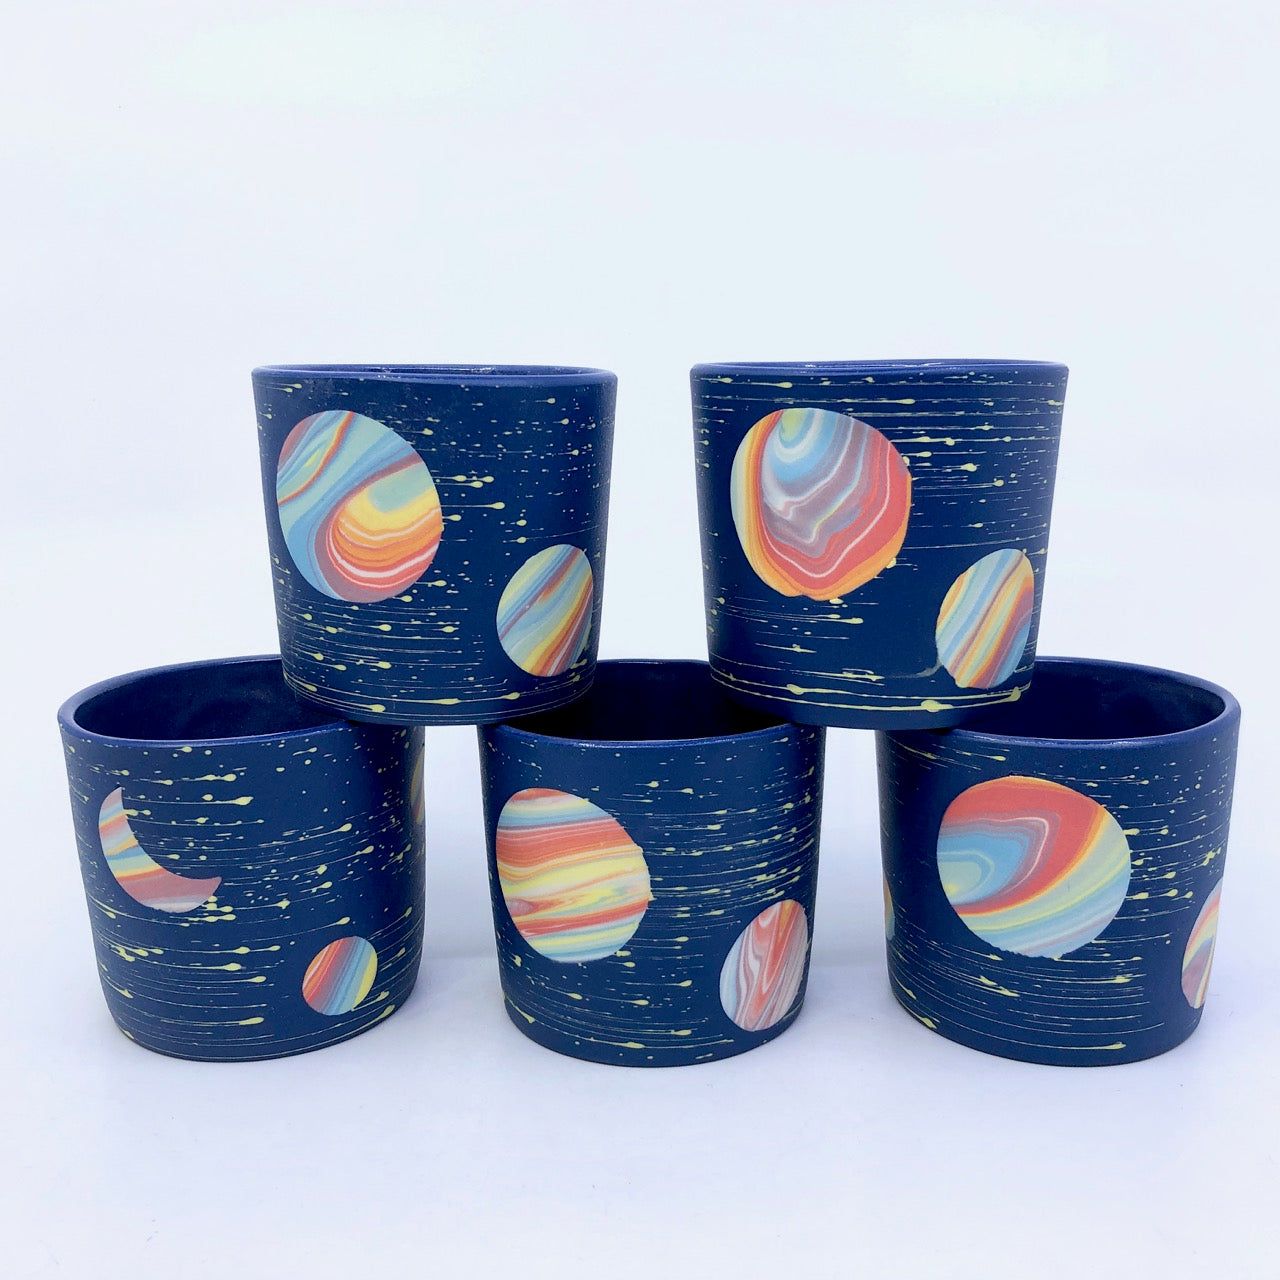 **Preorder** OG Cobalt Rainbow Galaxy Tumblers **EARTH DAY EXCLUSIVE**